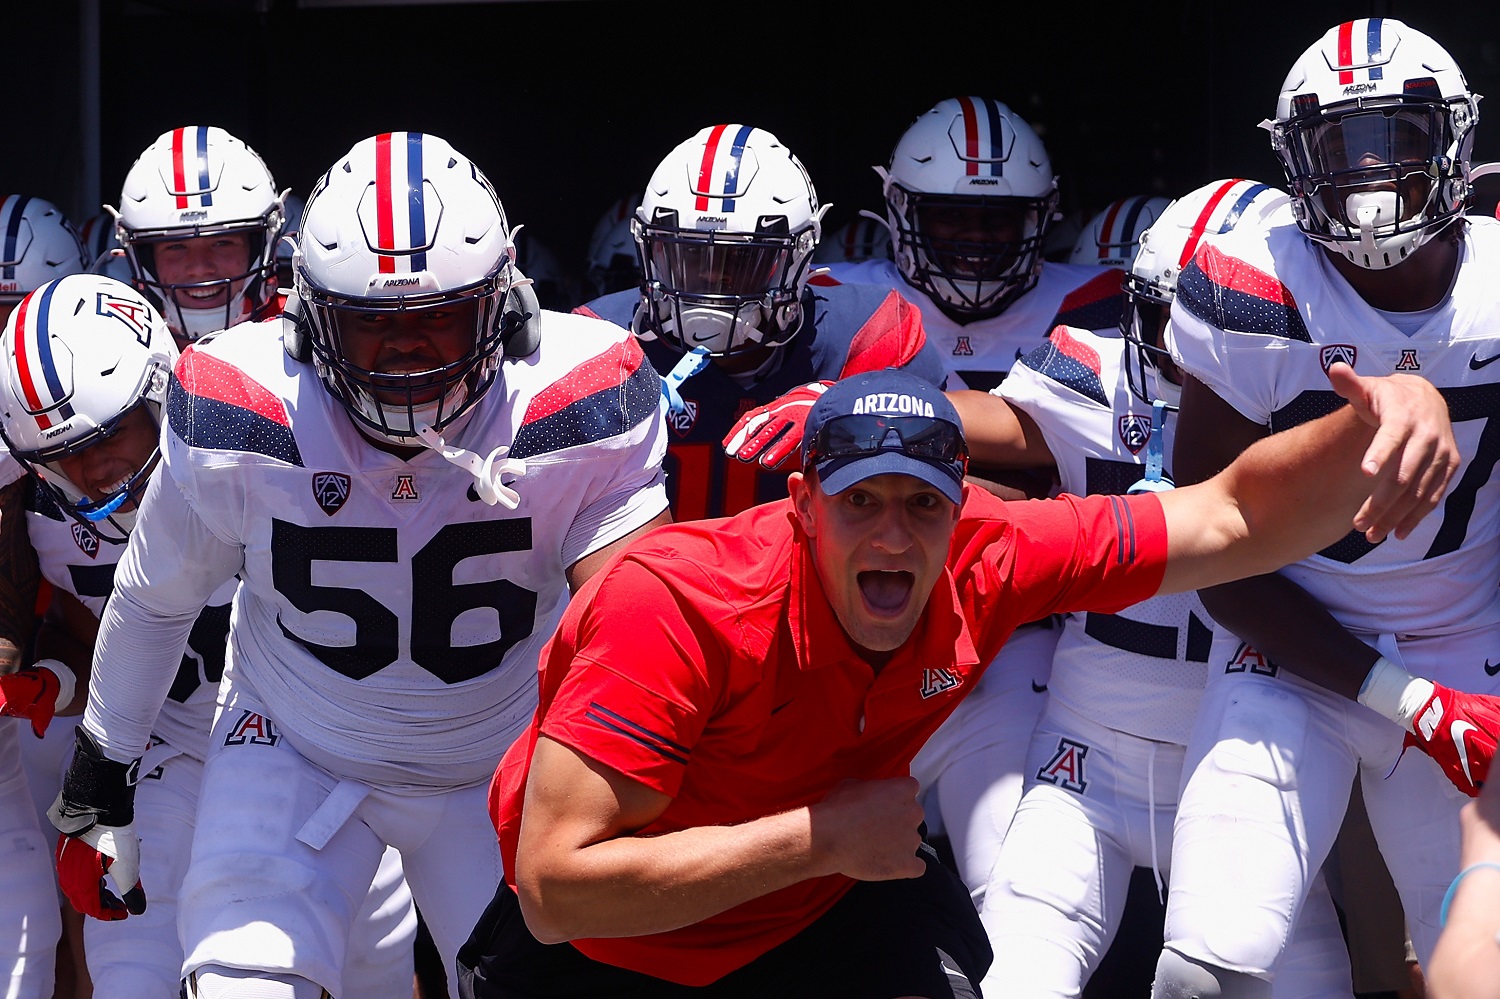 Rob Gronkowski returned to the University of Arizona campus for the first time in a decade while serving as an honorary coach for the annual spring game.